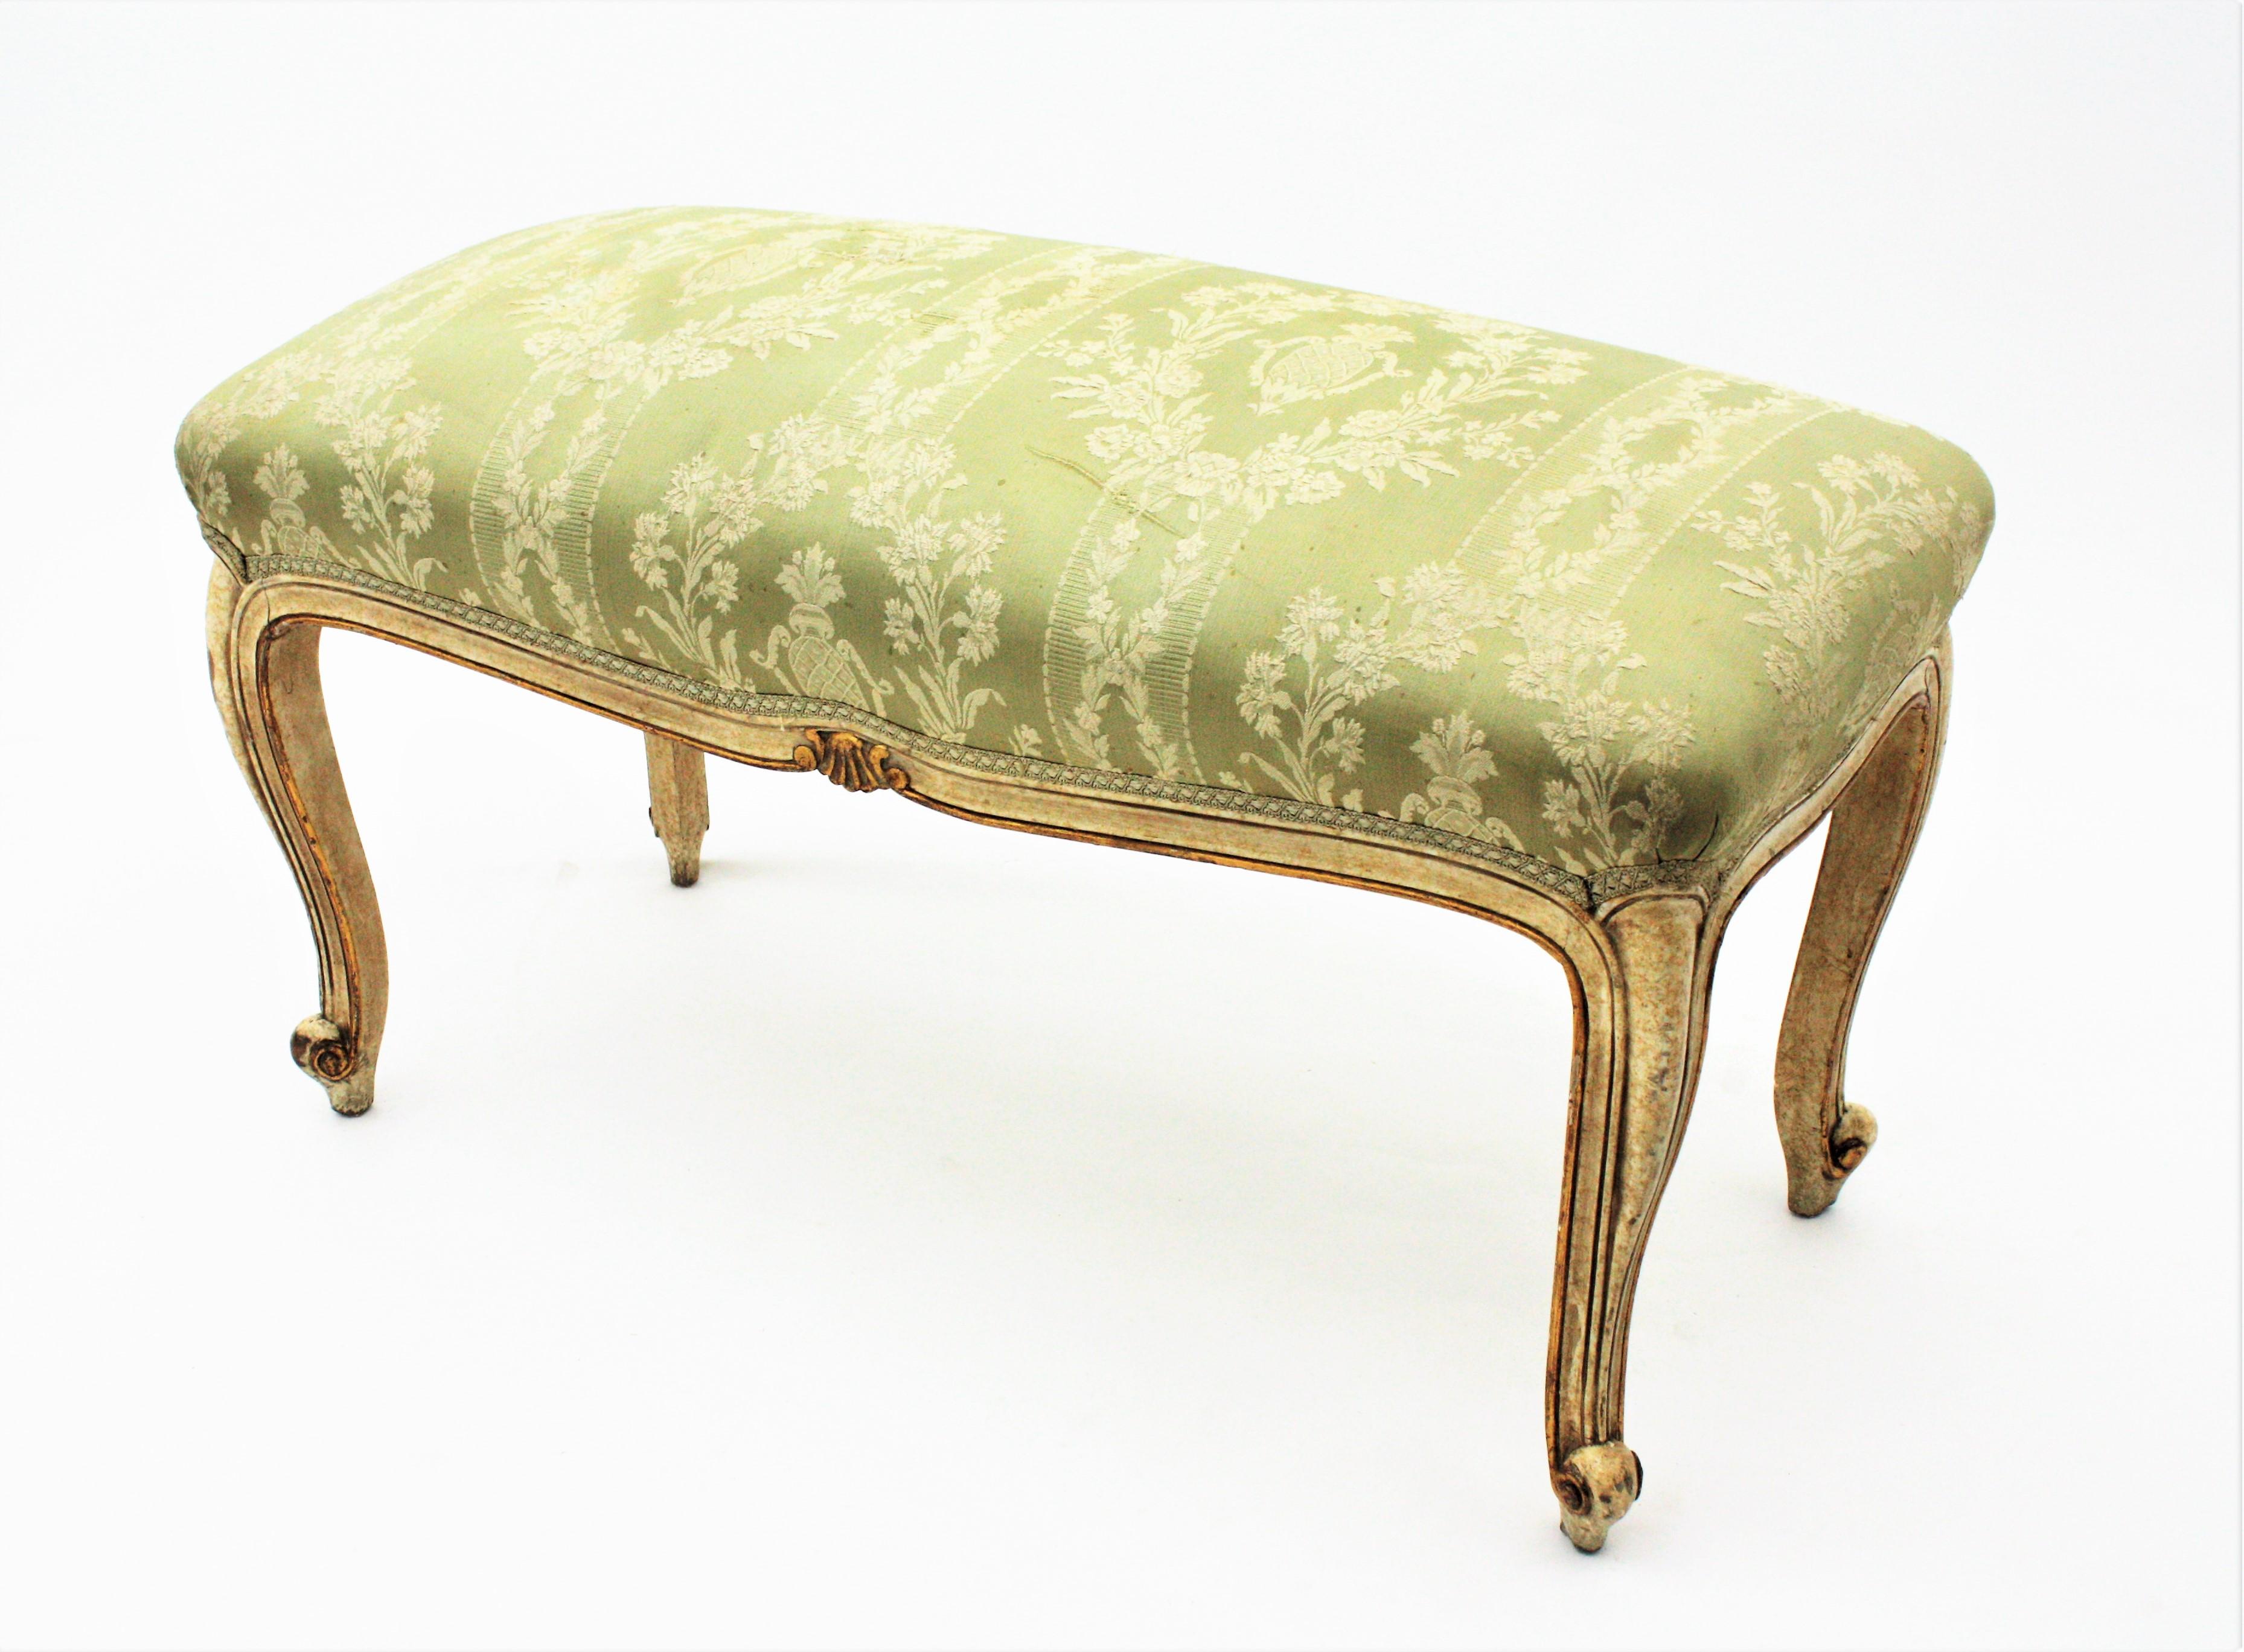 Stylish 19th Century Louis XV style carved wood bench patinated in ivory color with gold leaf gilt accents. France, circa 1850.
This bench or stool is raised on four cabriole shaped legs with carved scroll motifs and it is accented by decorative